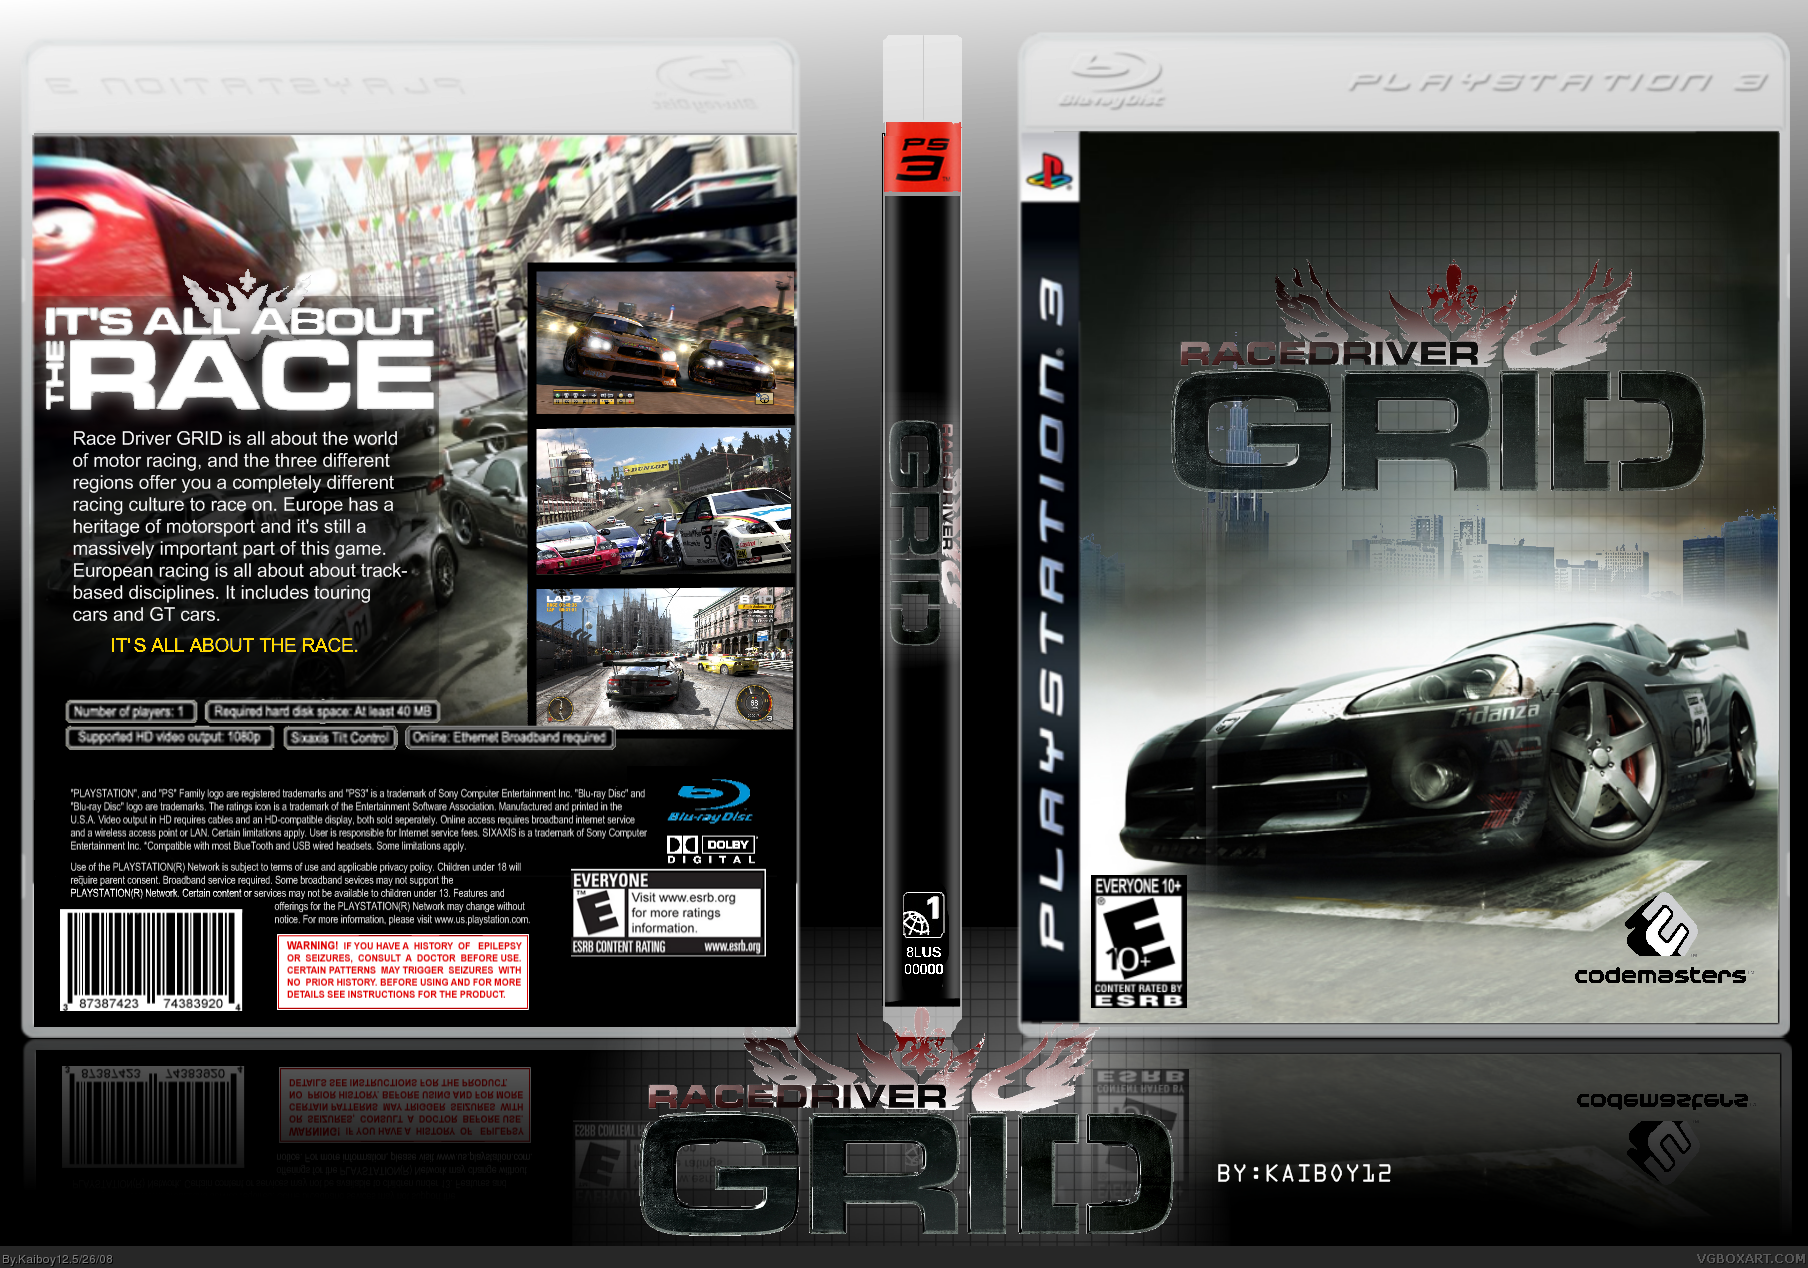 Race Driver: Grid PlayStation 3 Box Art Cover by Kaiboy12